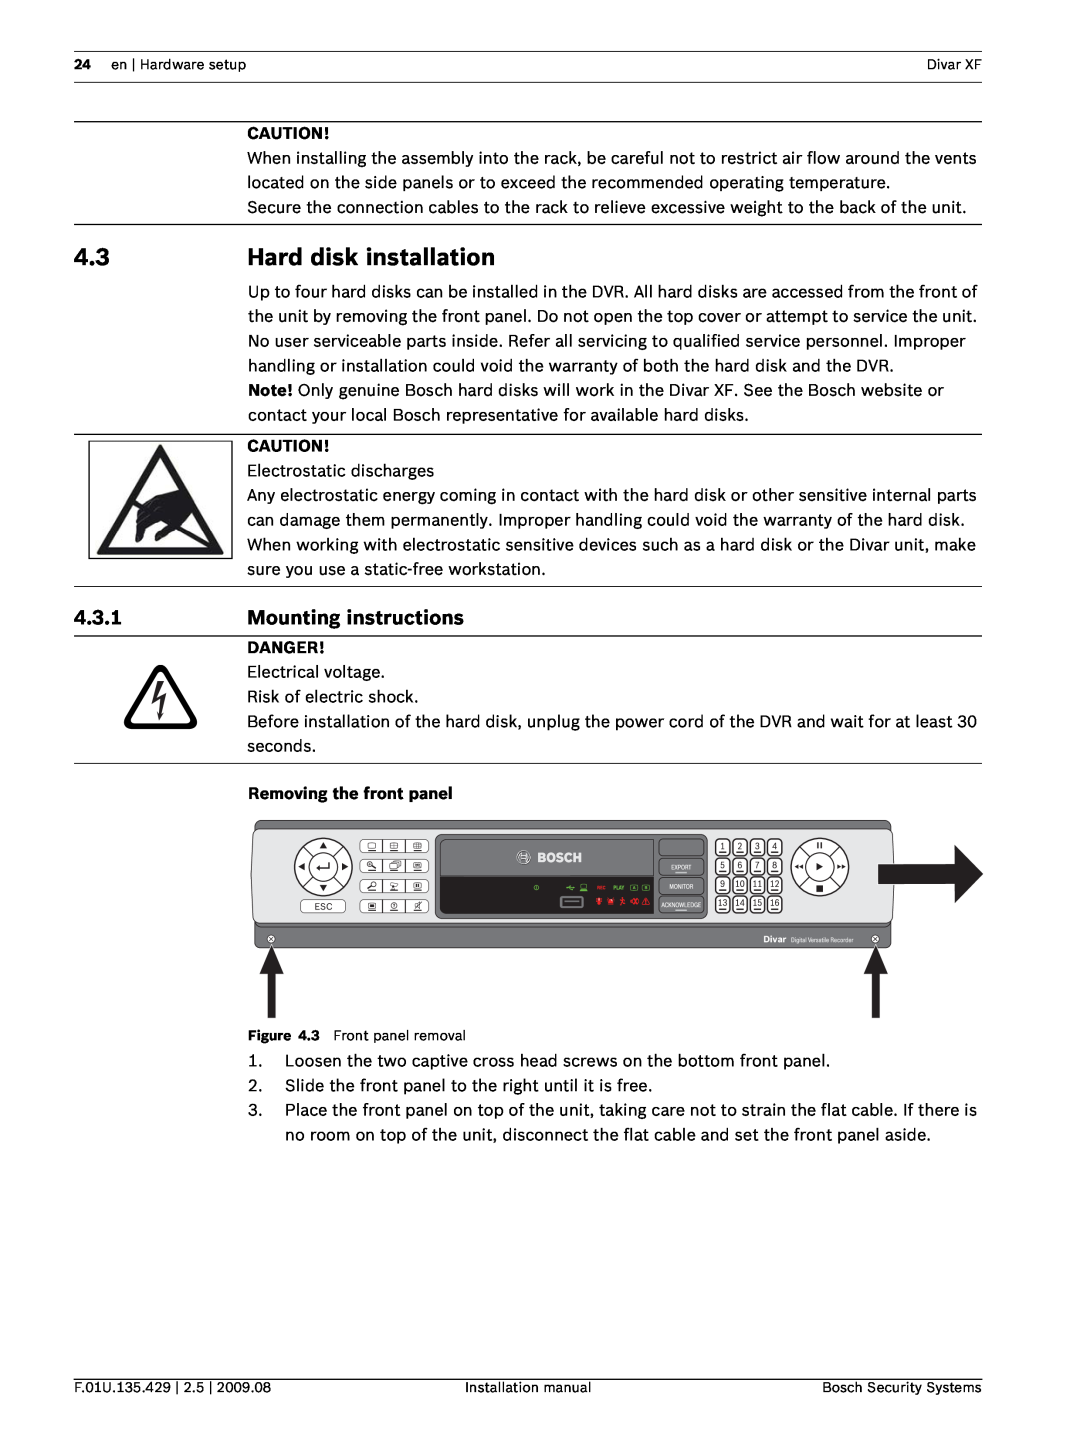 Bosch Appliances XF Hard disk installation, 4.3.1, Mounting instructions, Removing the front panel, Danger 